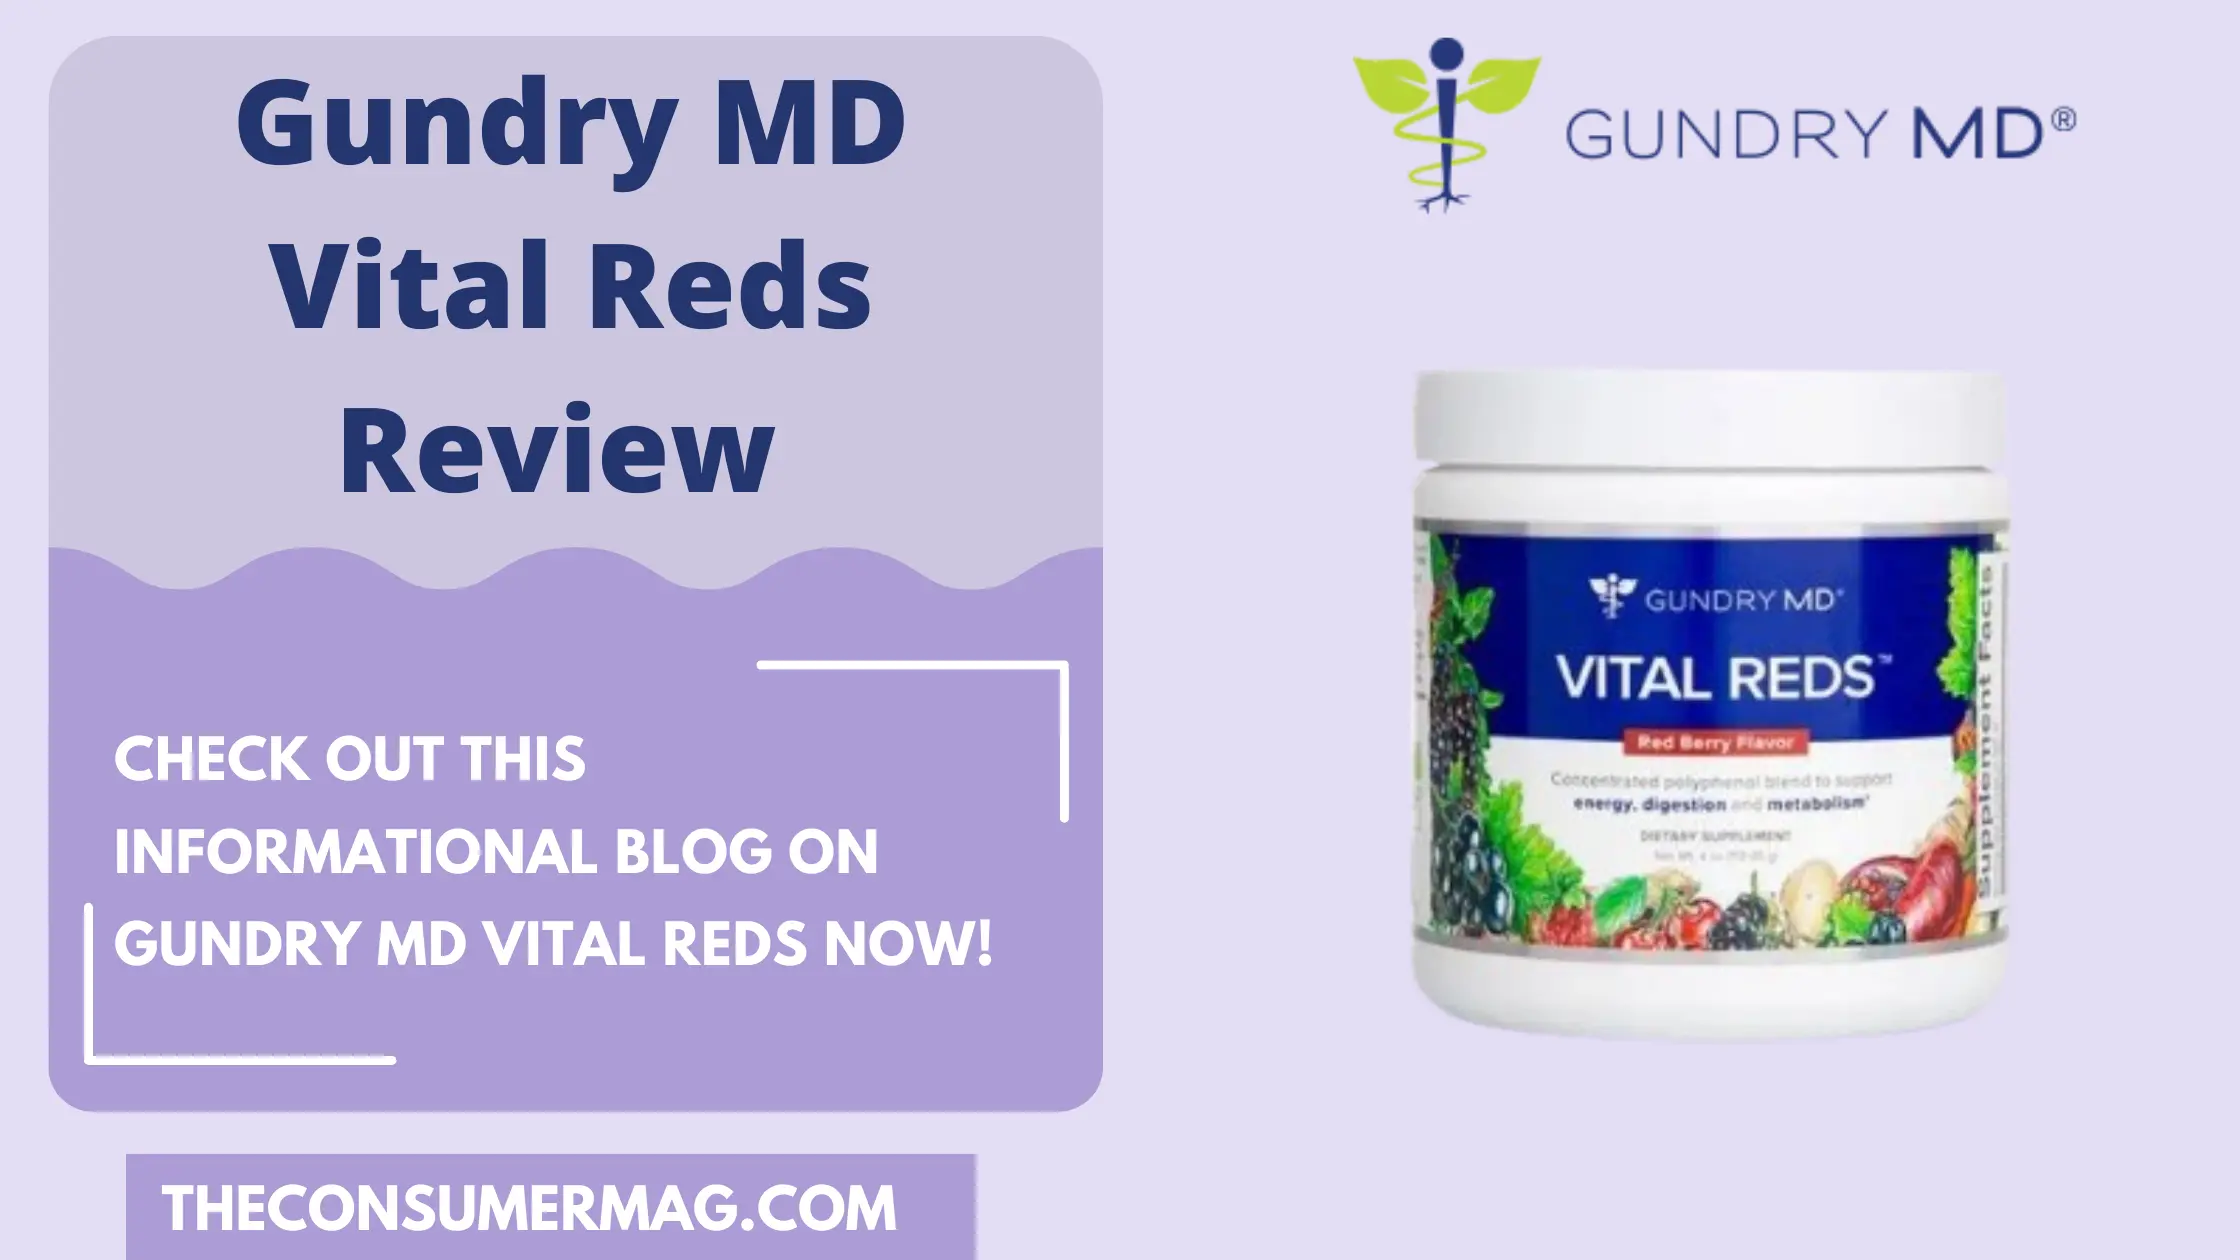 Gundry MD Vital Reds Review | Read All Vital Reds Reviews | Save 30% Now!